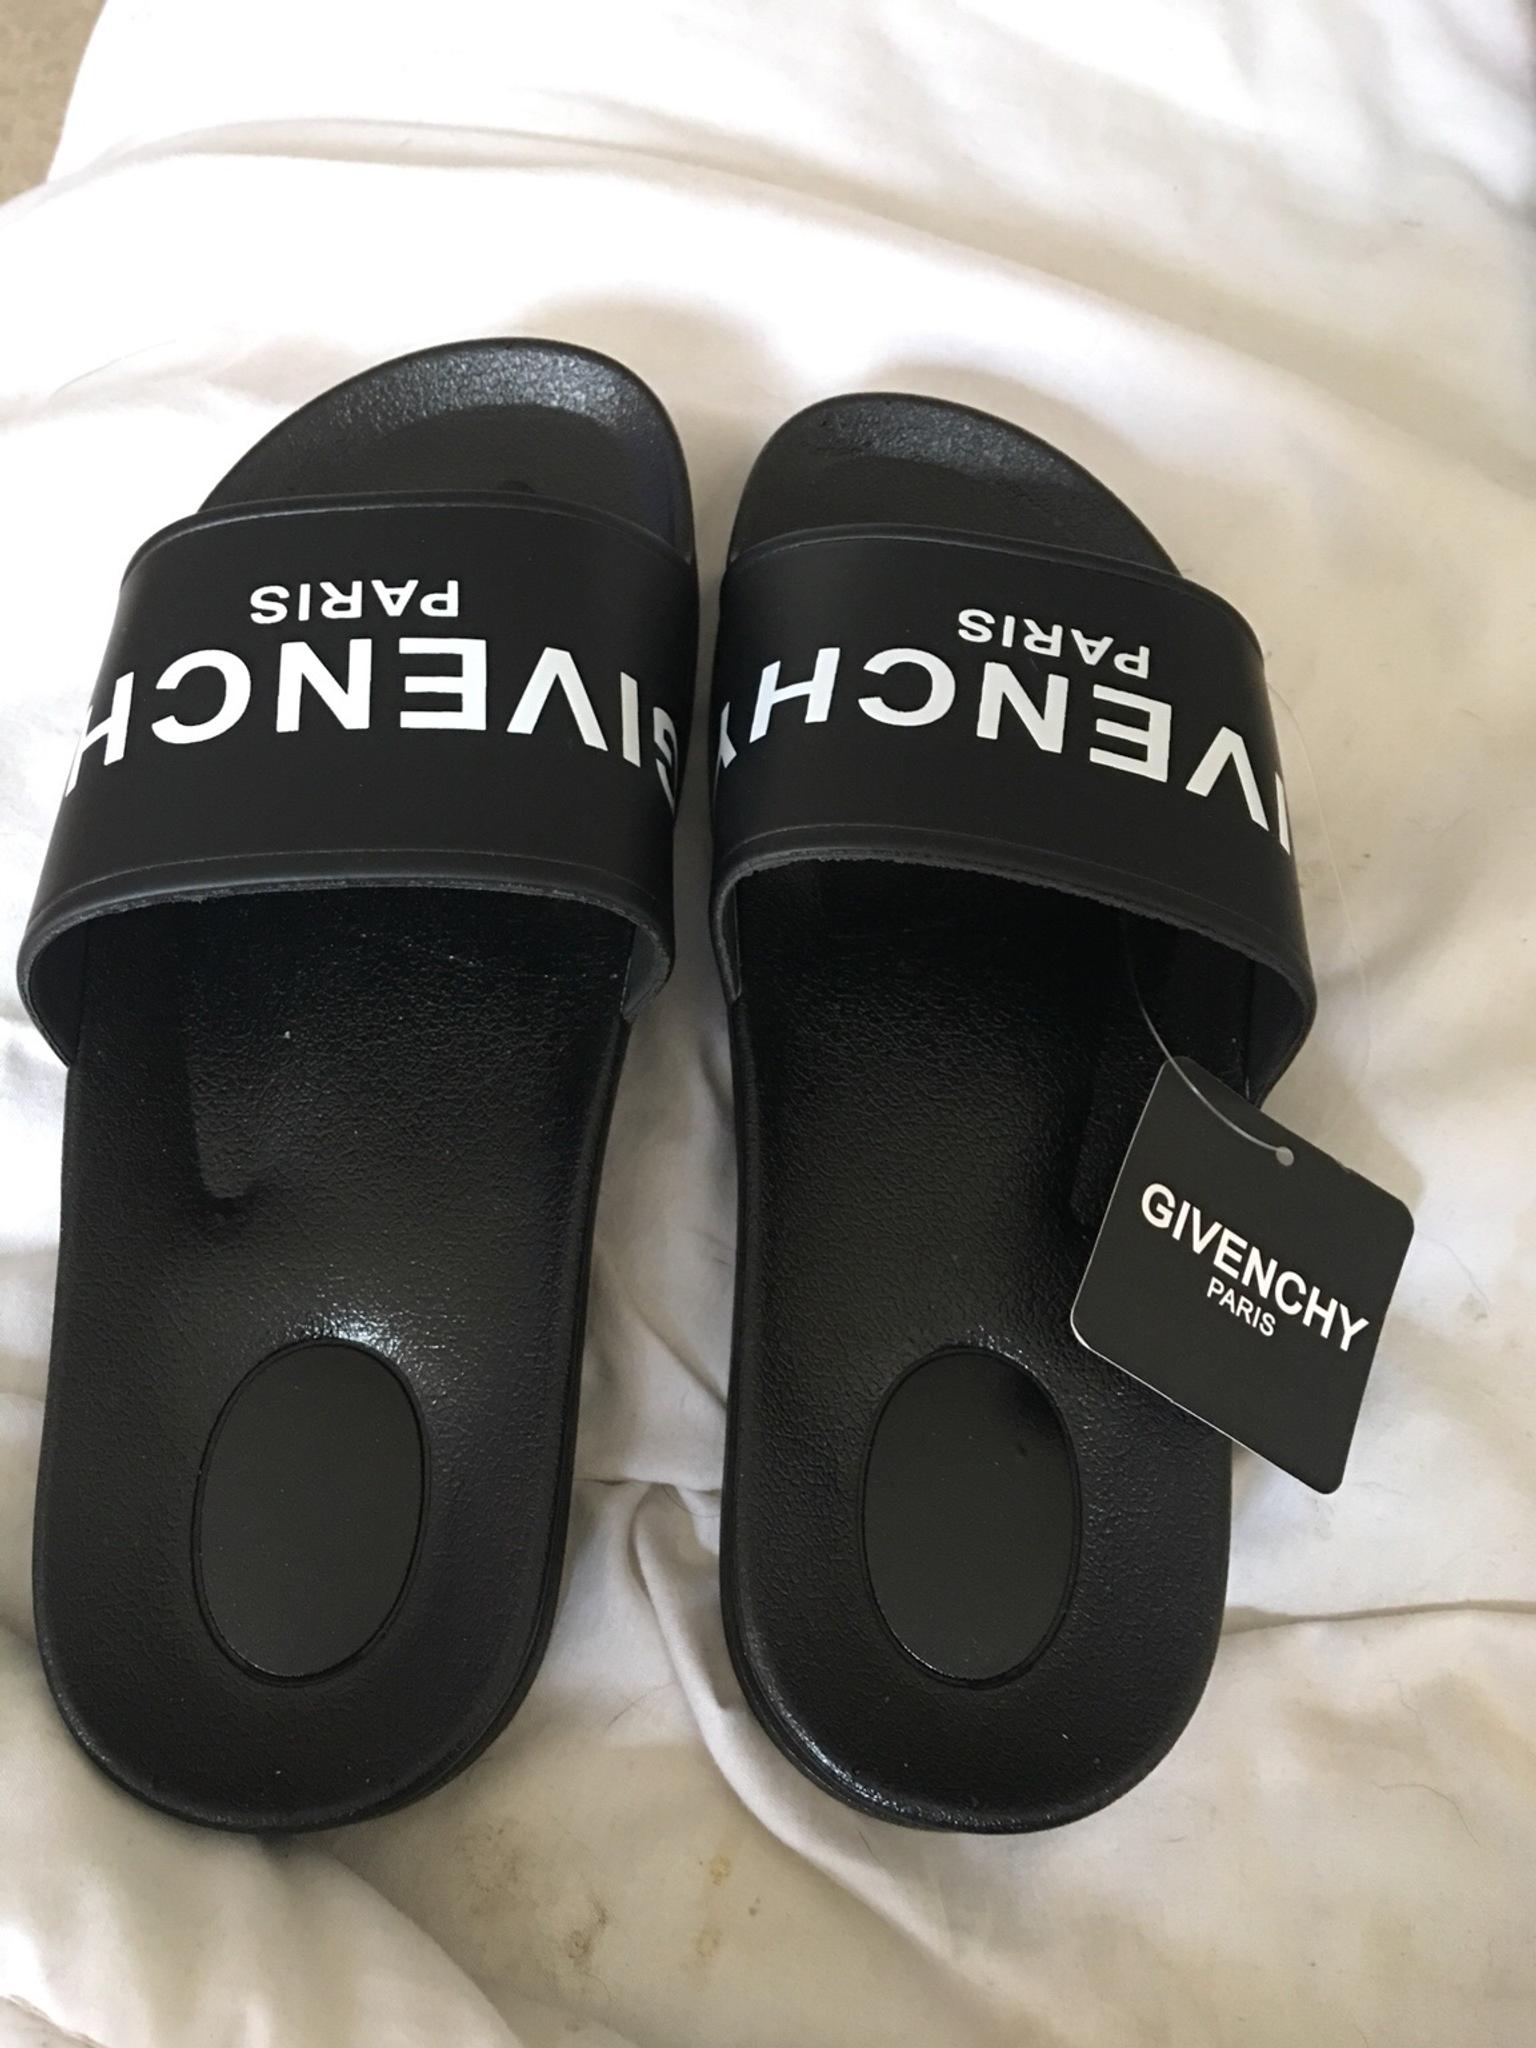 givenchy sliders size 5